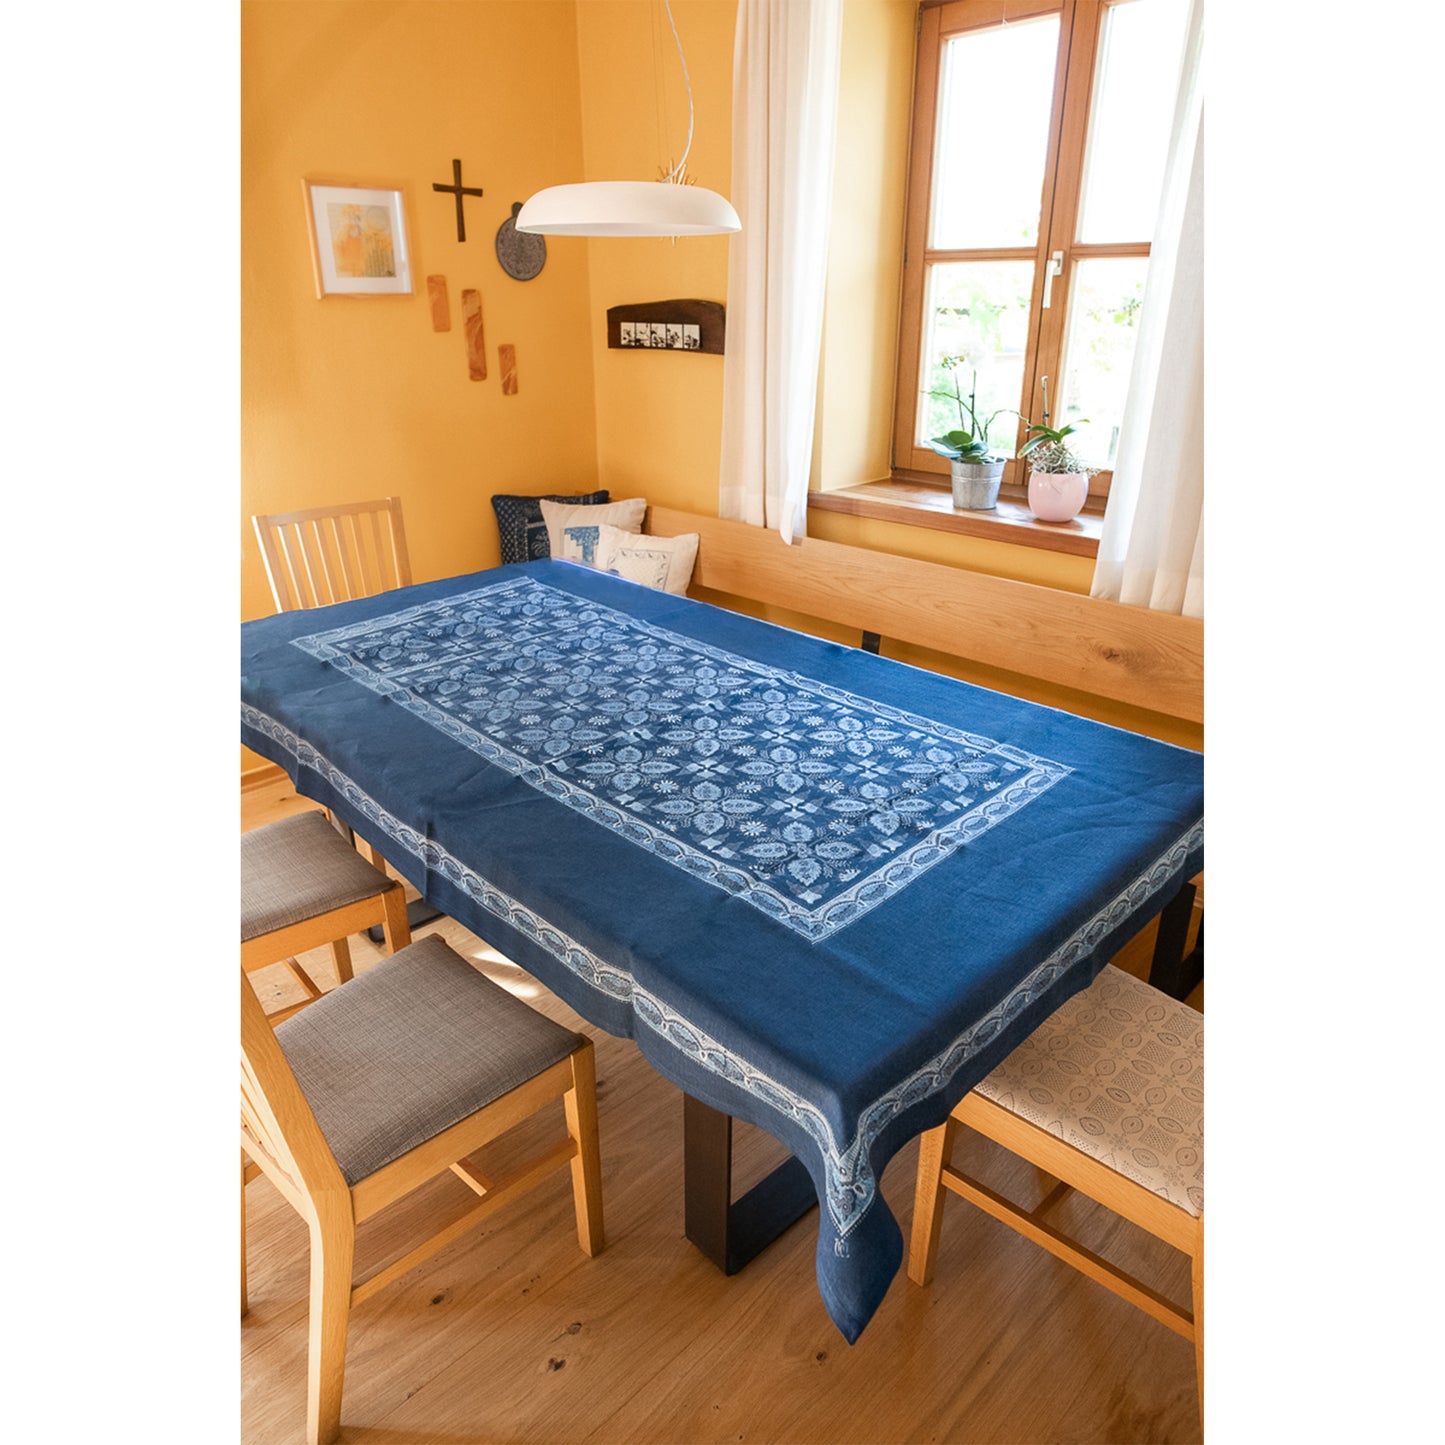 Austria, Karl and Maria Wagner, Blaudruck Basely Print Tablecloth Yardage Large 1.8 m Wide